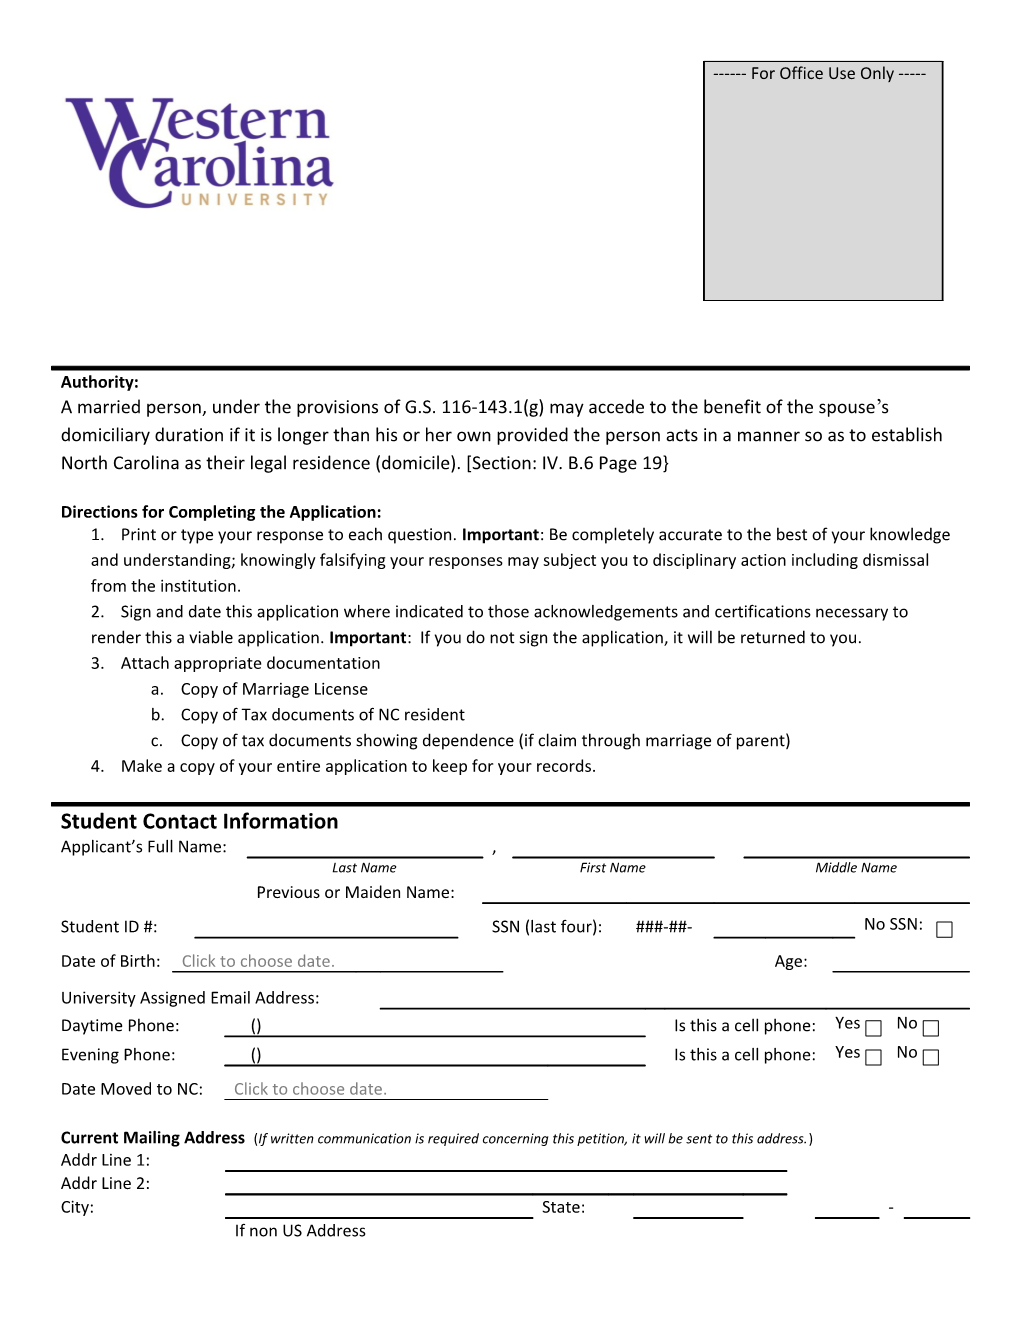 Marriage to a NC Resident Page 4 of 4 11/22/2010